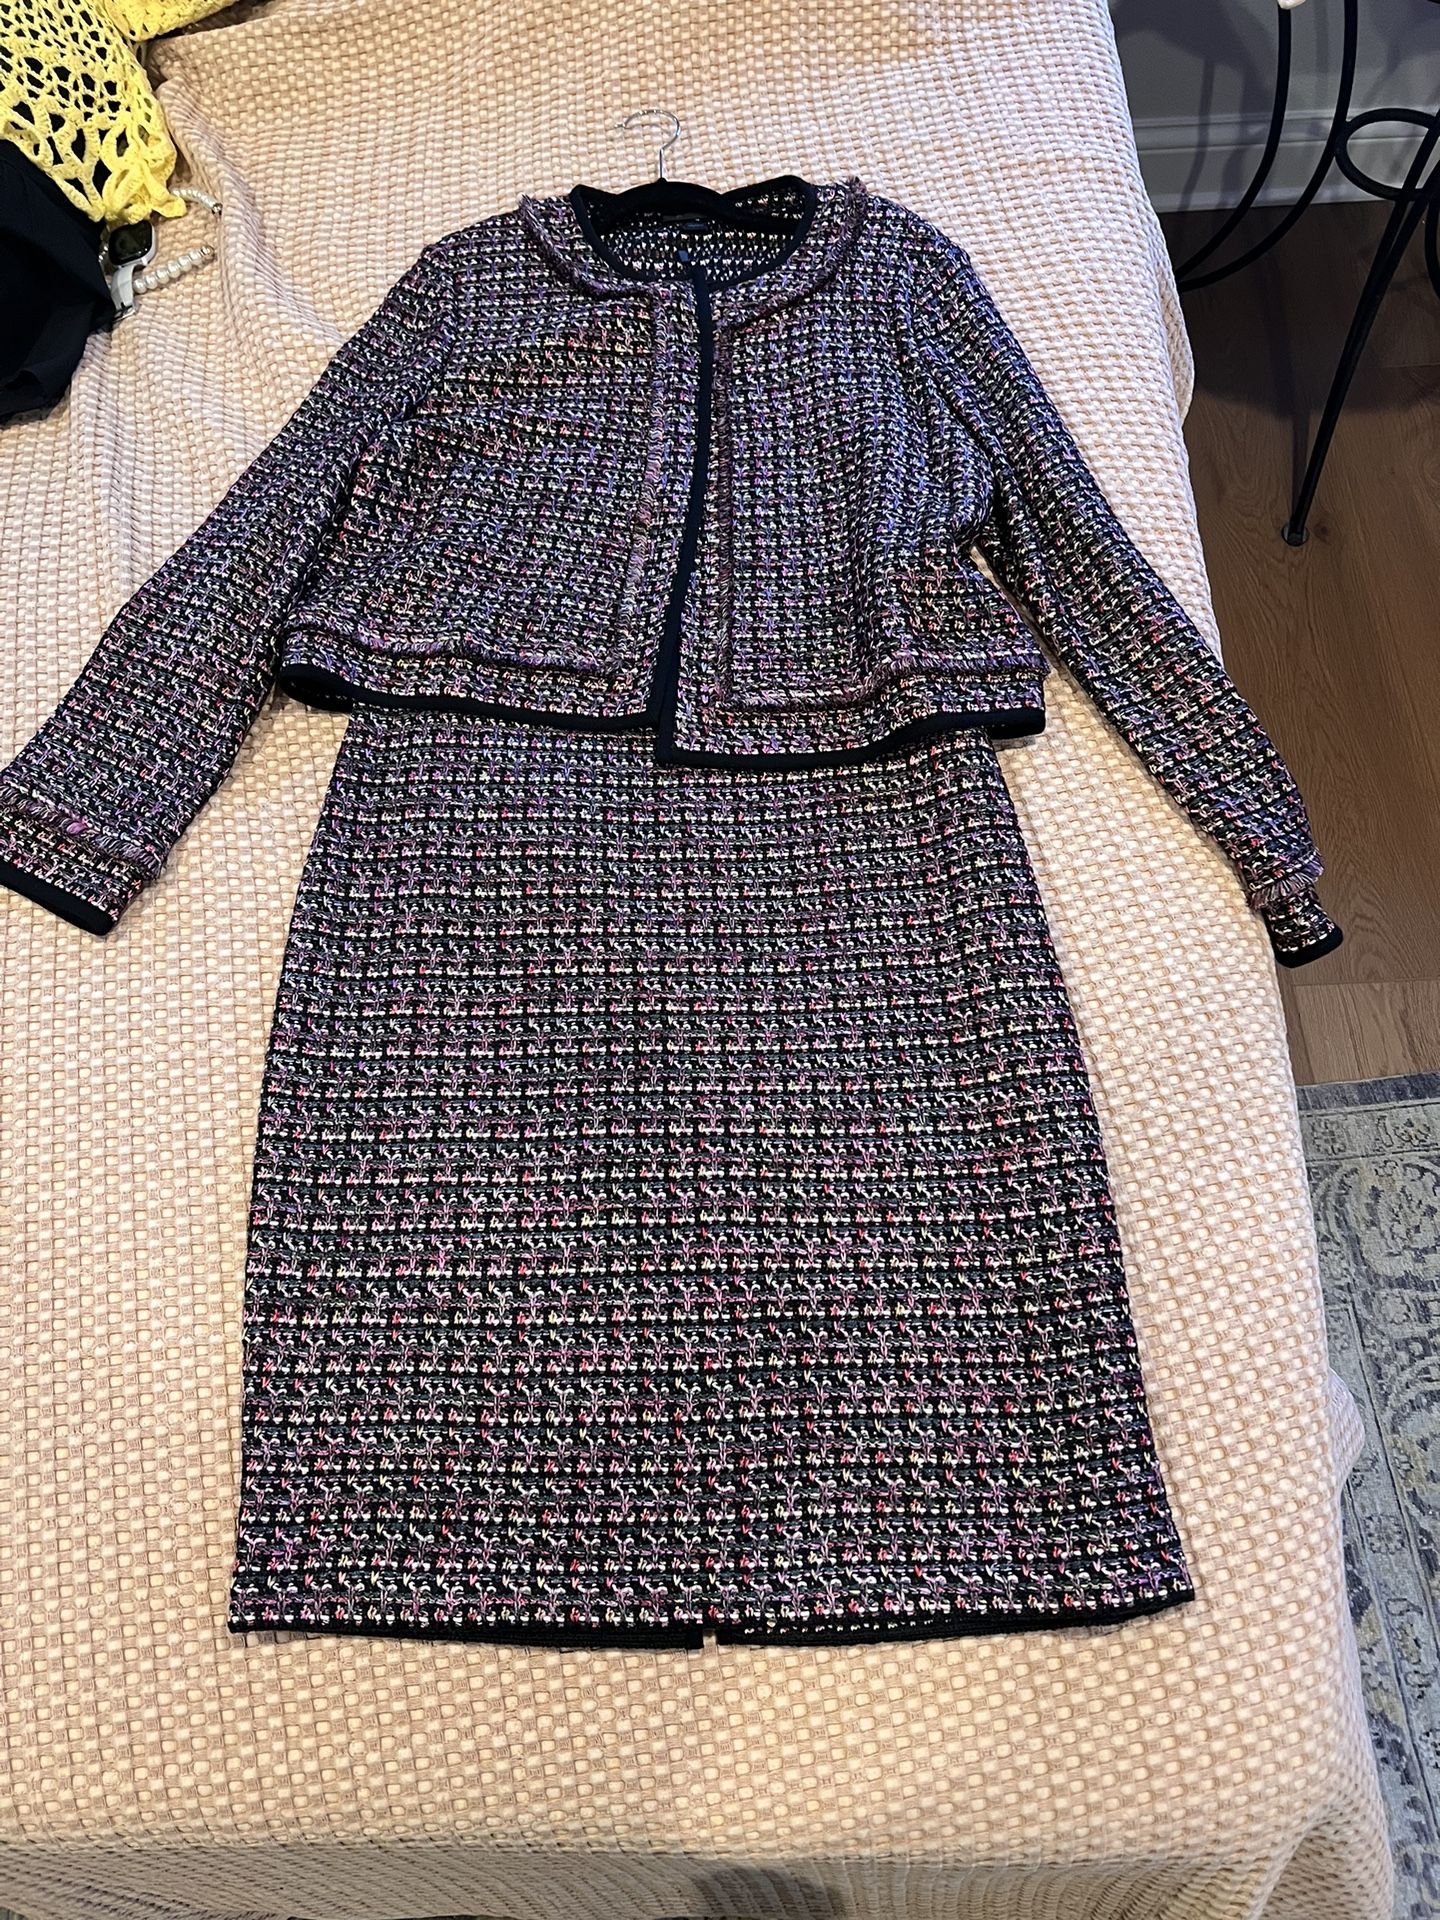 ST. JOHN BRAND NEW With Tags Knit Dress With Jacket 